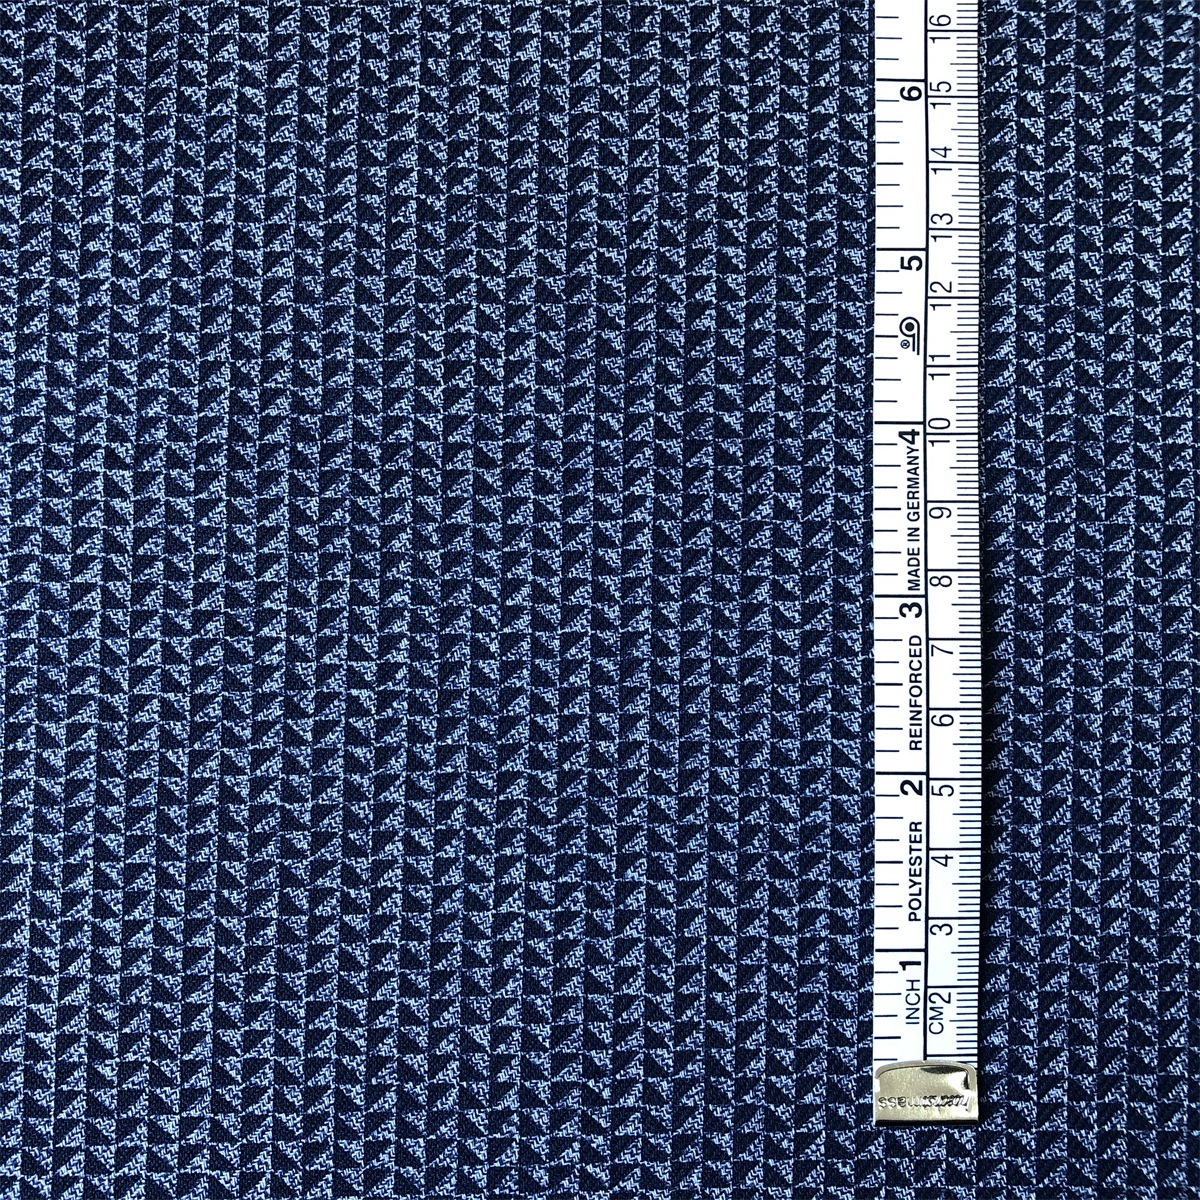 Cotton Fabric by compact mouline yarn for men's casual shirts 100% cotton printed on yarn dyed twill chambray woven shirts fabric